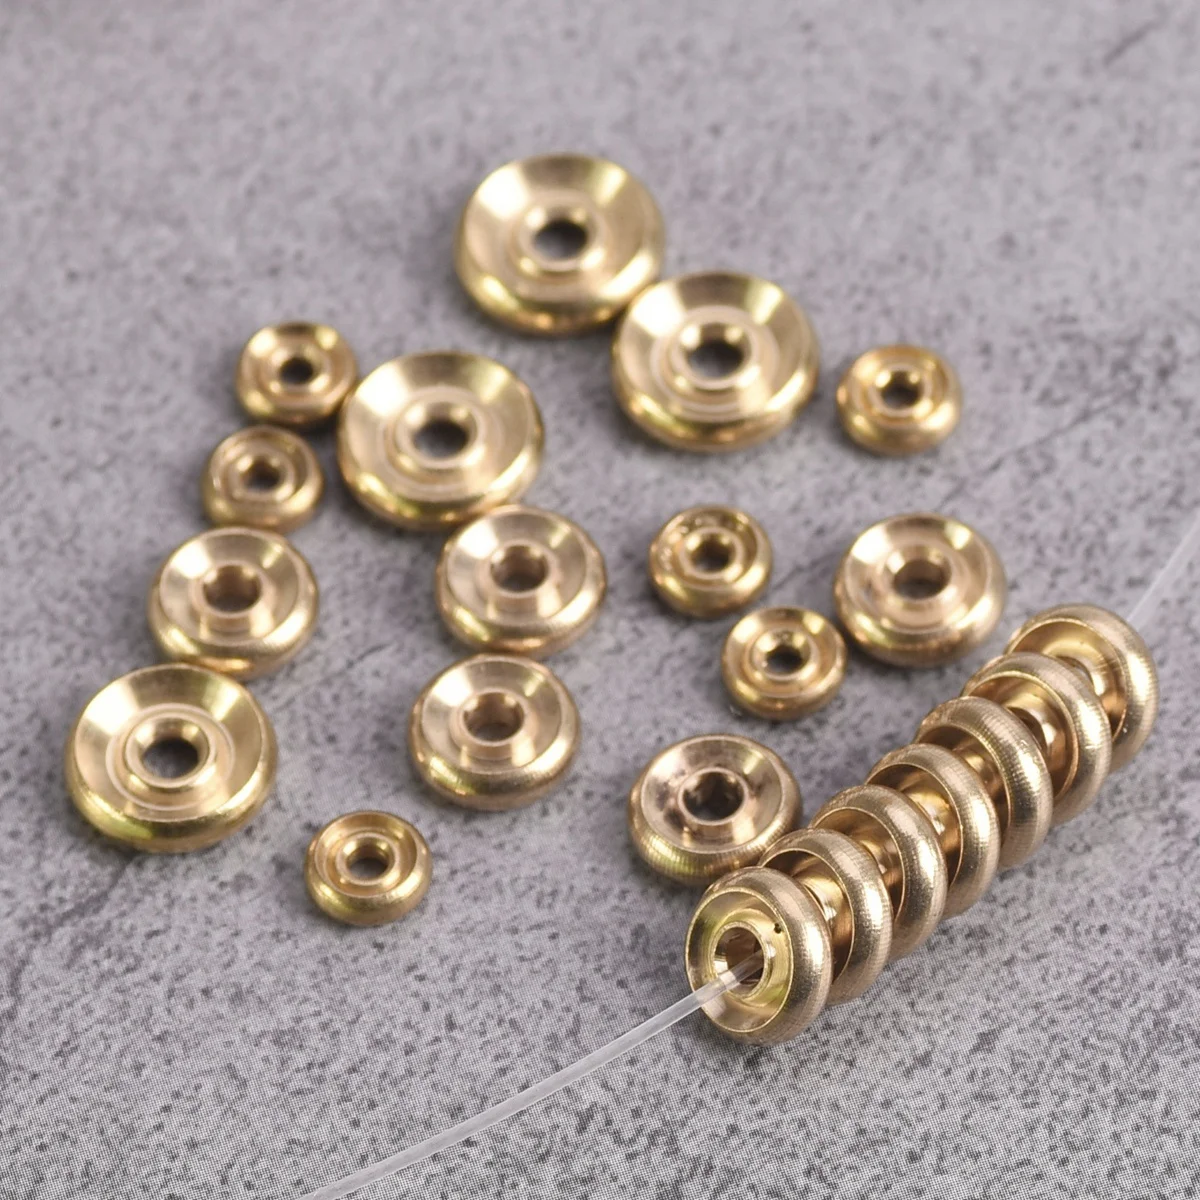 30pcs Flat Round Rondelle 6mm 8mm 10mm Solid Brass Metal Light Gold Color Loose Spacer Beads lot for Jewelry Making Findings muslady brass b flat baritone bb wind instrument gold lacquer surface